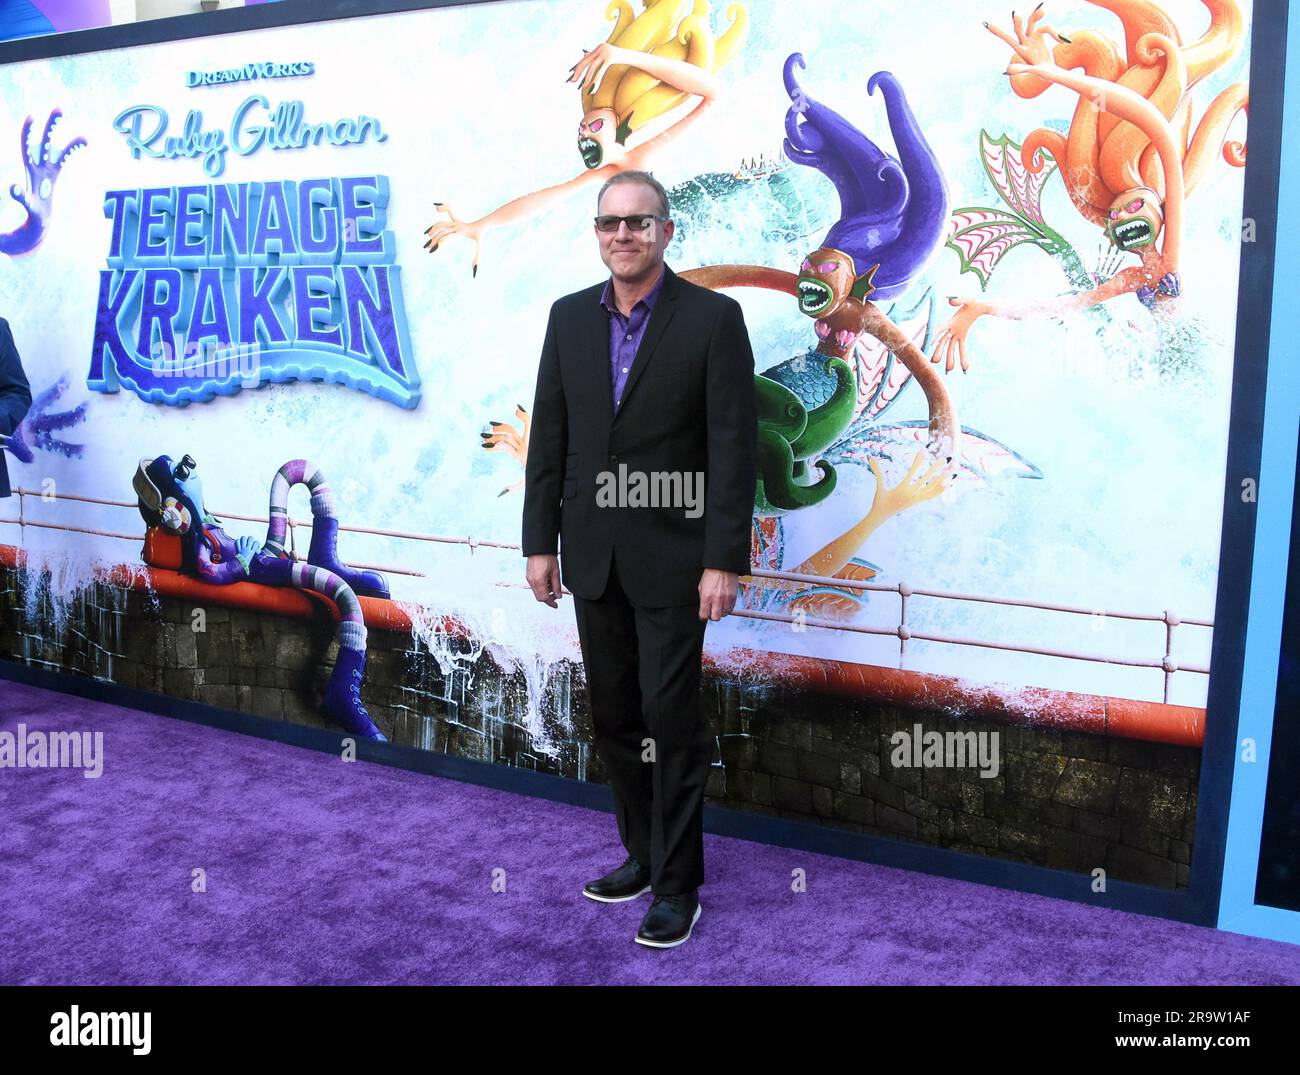 Los Angeles, California. 28th June 2023 Director Kirk DeMicco attends Universal Pictures Ruby Gillman: Teenage Kraken Premiere at TCL Chinese Theatre on June 28, 2023 in Los Angeles, California, USA. Photo by Barry King/Alamy Live News Stock Photo